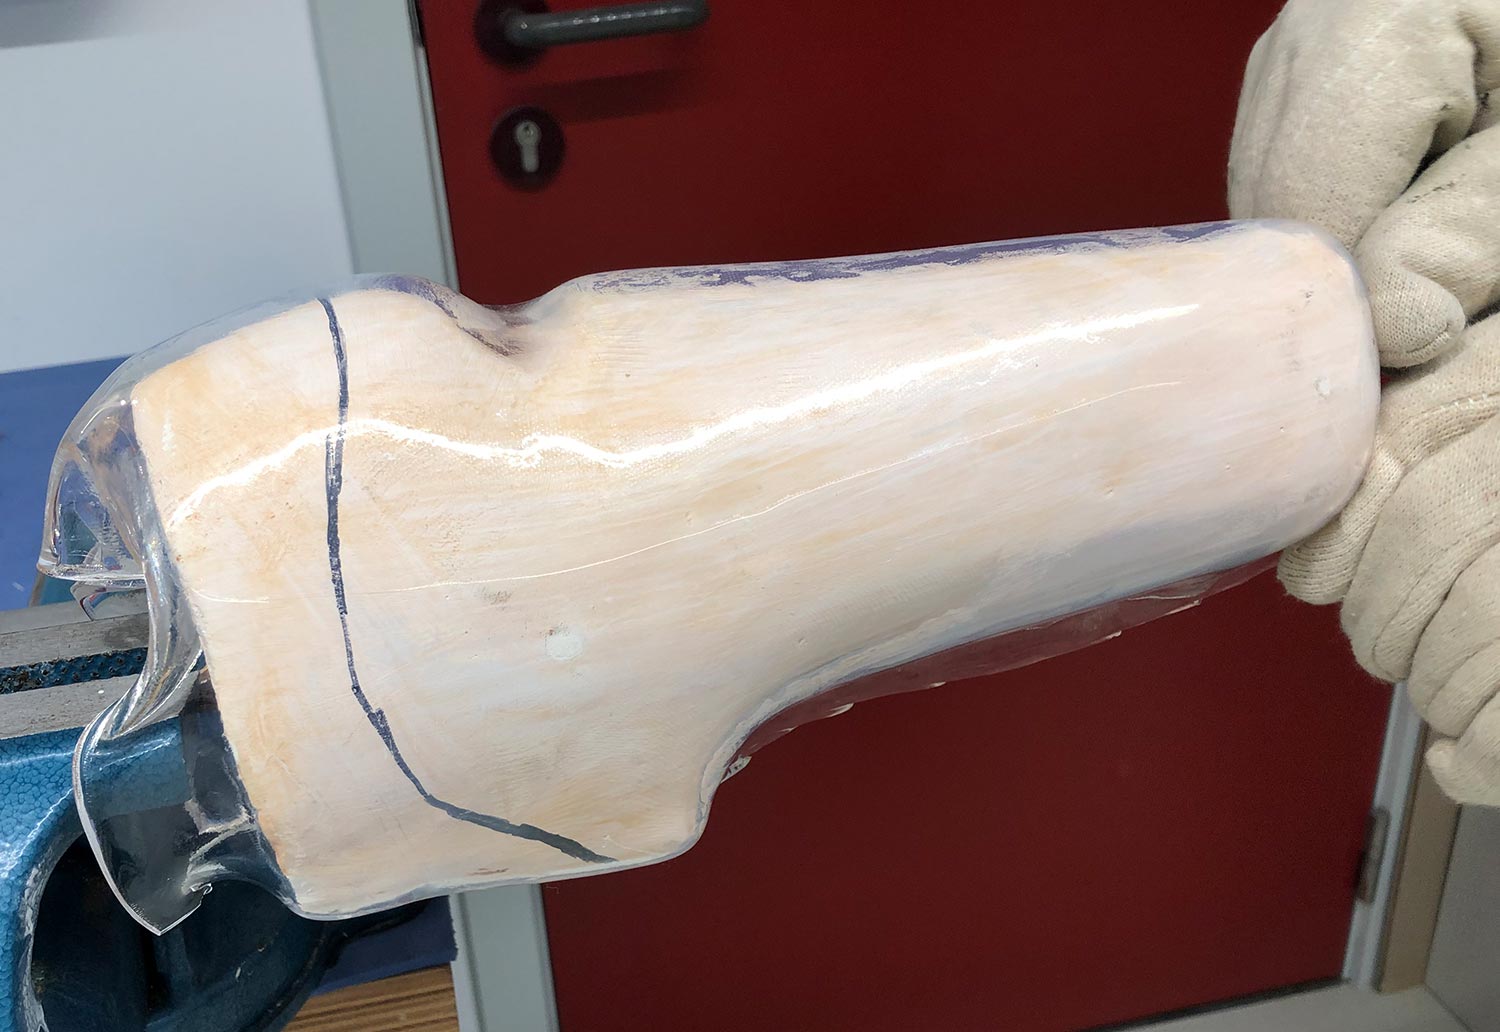 Two gloved hands moulding a transtibial prosthetic socket.